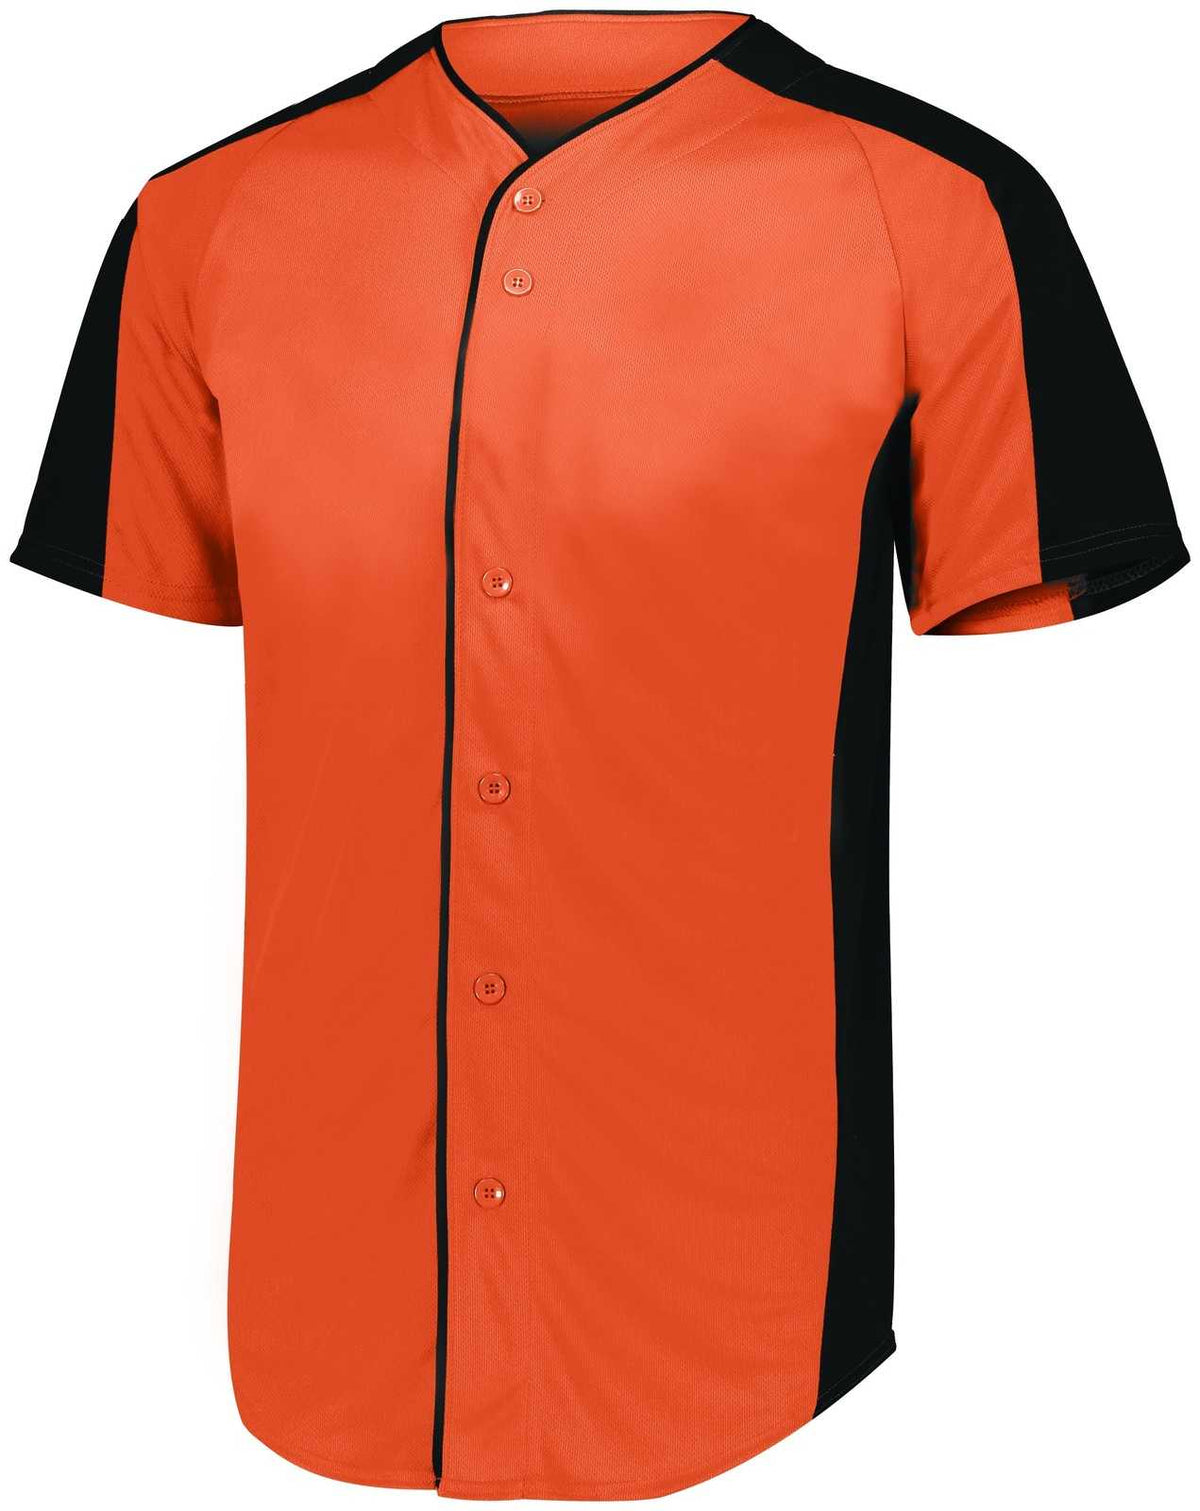 Augusta 1656 Youth Full-Button Baseball Jersey - Orange Black - HIT a Double